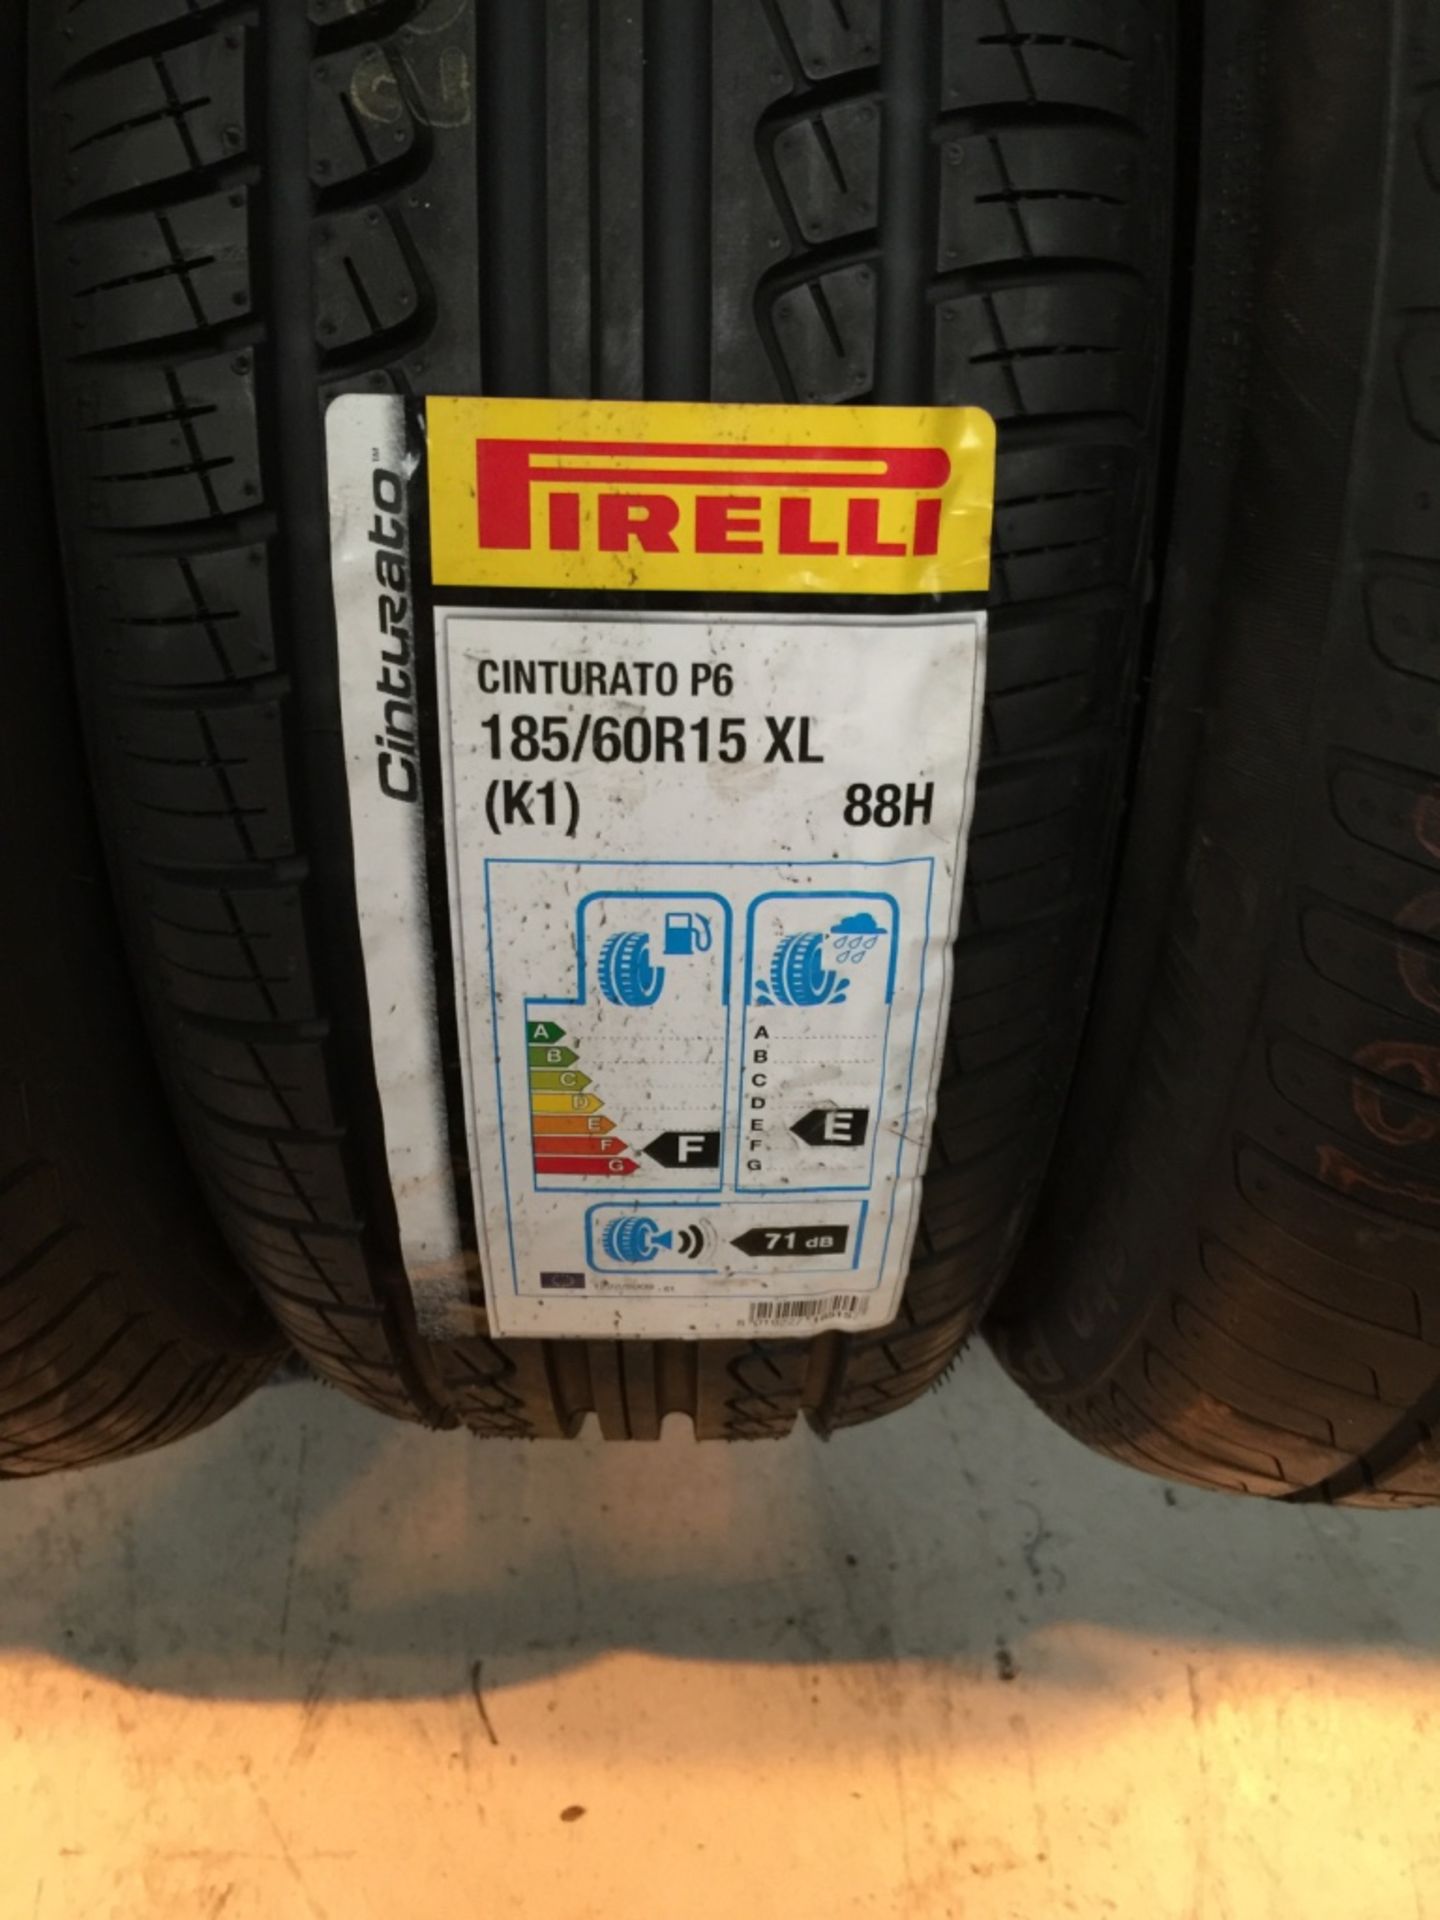 54: Pirelli Tyres Car & 4X4 - Many Large Sizes to include 18,19,21" Please see further Pictures ( - Image 53 of 55